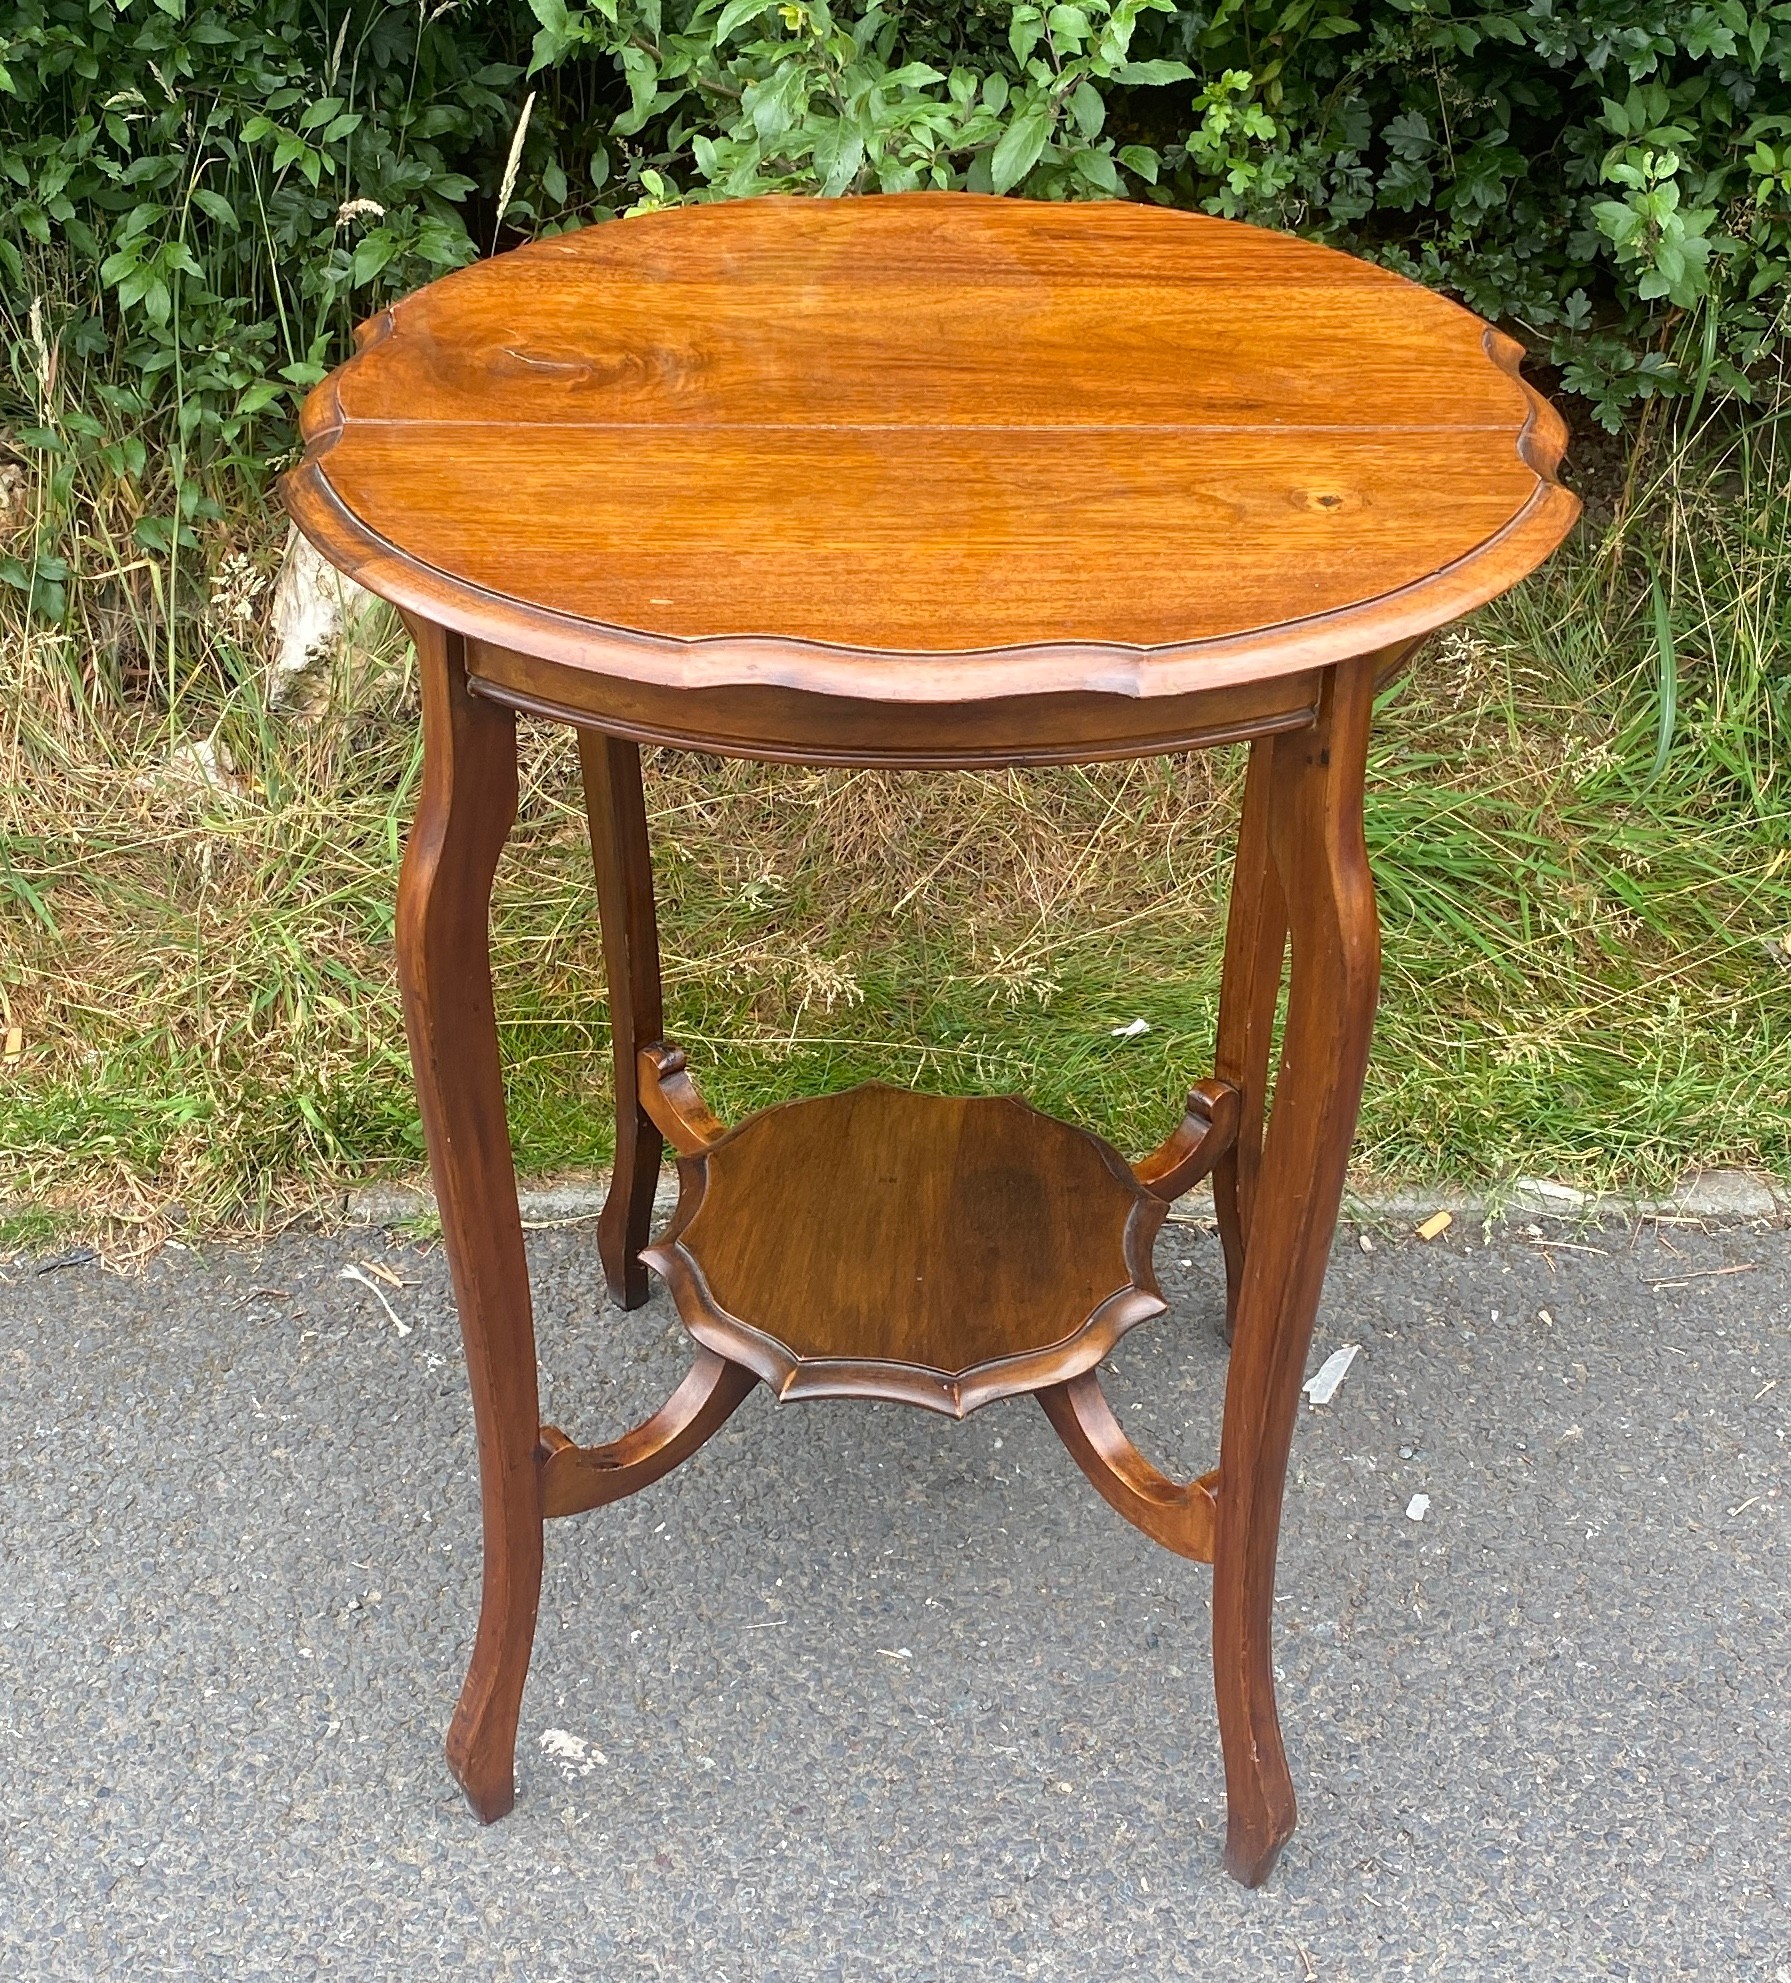 Oak occasional table measures approx 27 inches 23 inches diameter